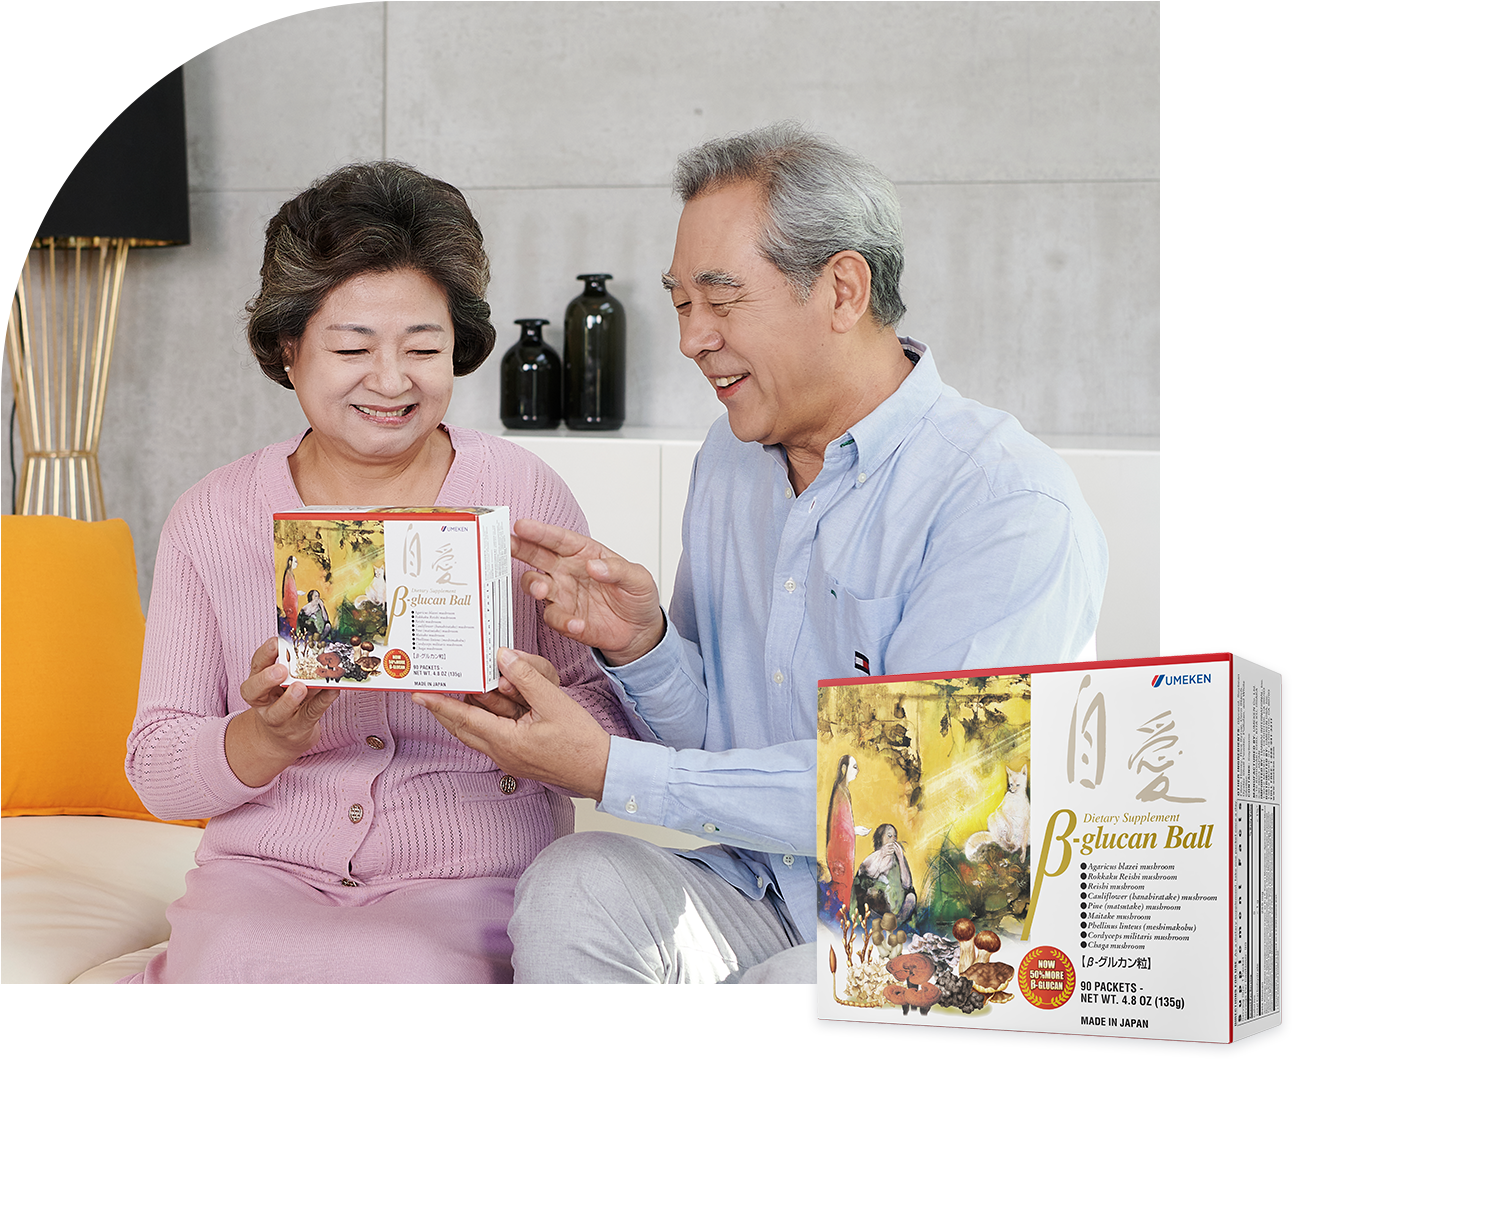 While most beta-glucan products are made from extracts of yeast, grain, or a few mushrooms, Umeken Beta-Glucan uses extracts from 9 of the finest mushrooms and 2 yeast extracts, giving you a superior and powerful product.